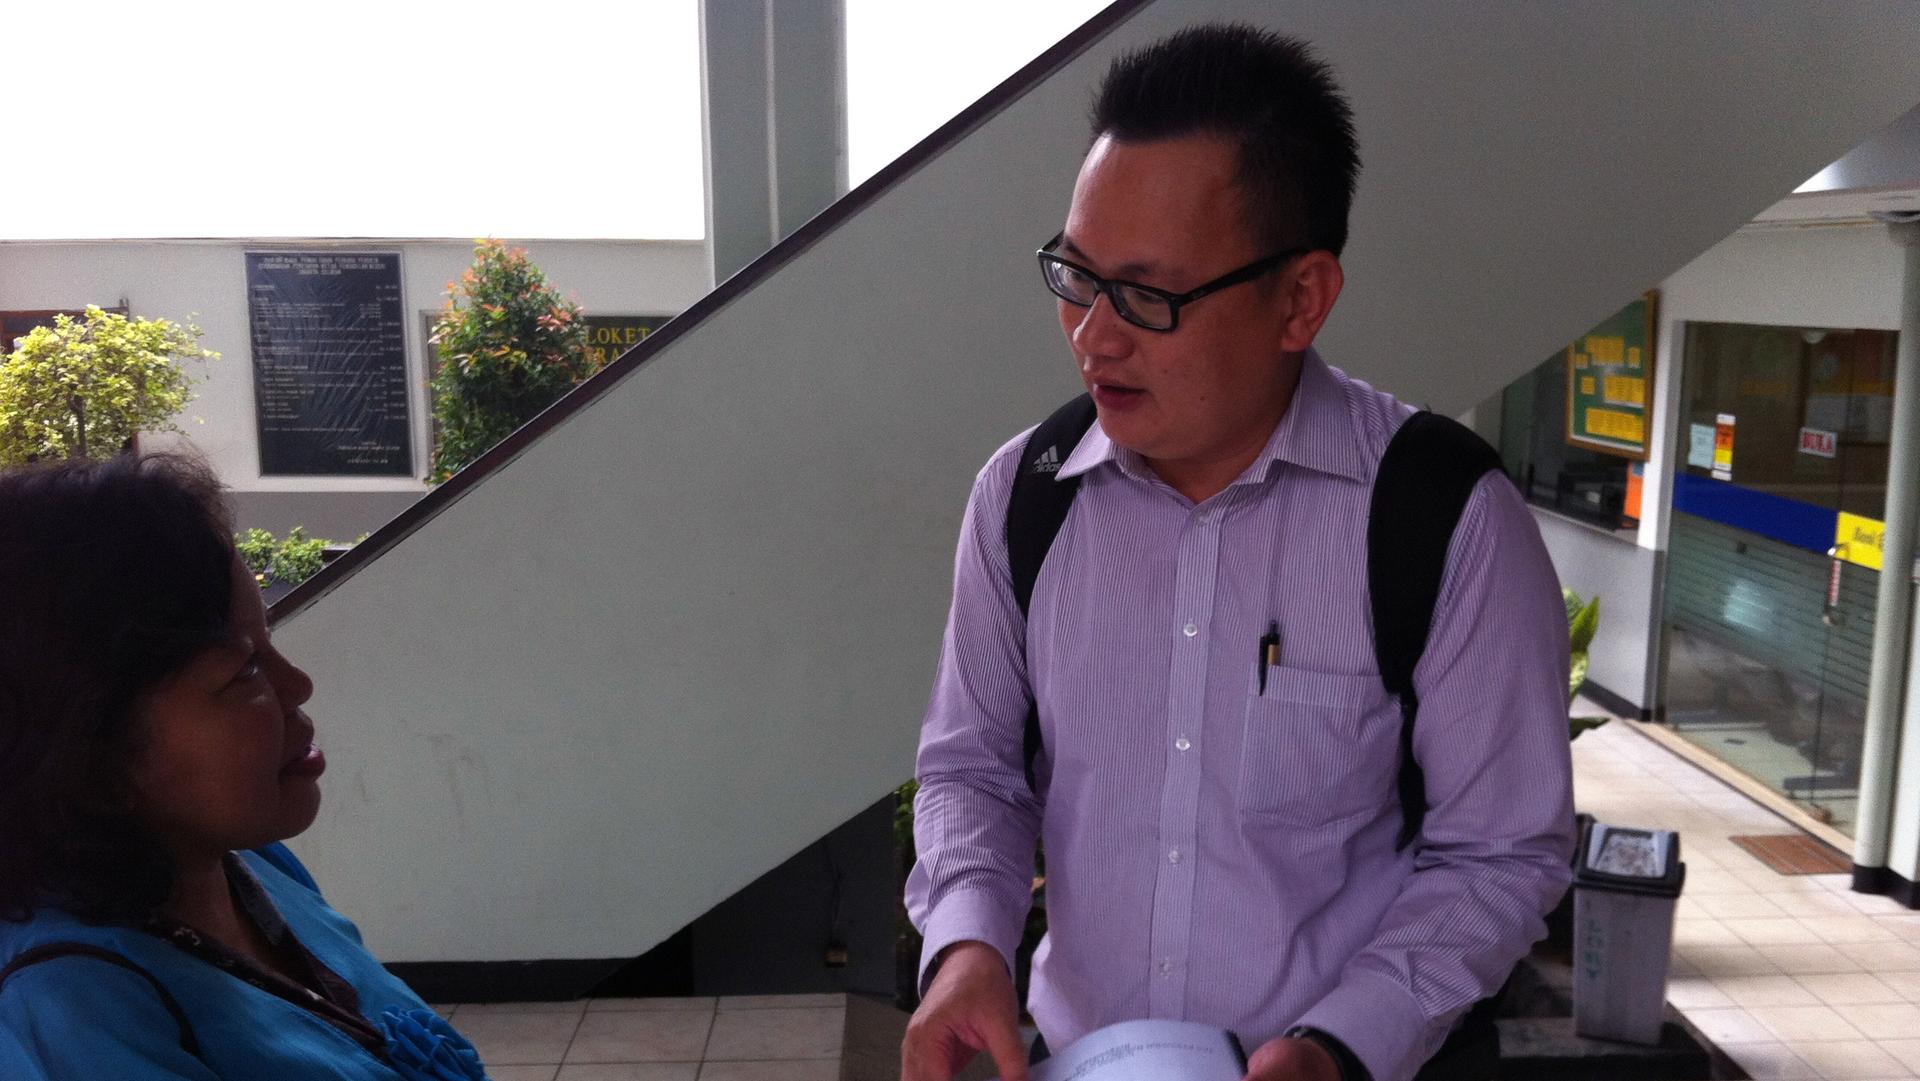 Benny Handoko discusses his Twitter defamation case with Susy Rizky, one of his supporters, after a defense hearing.